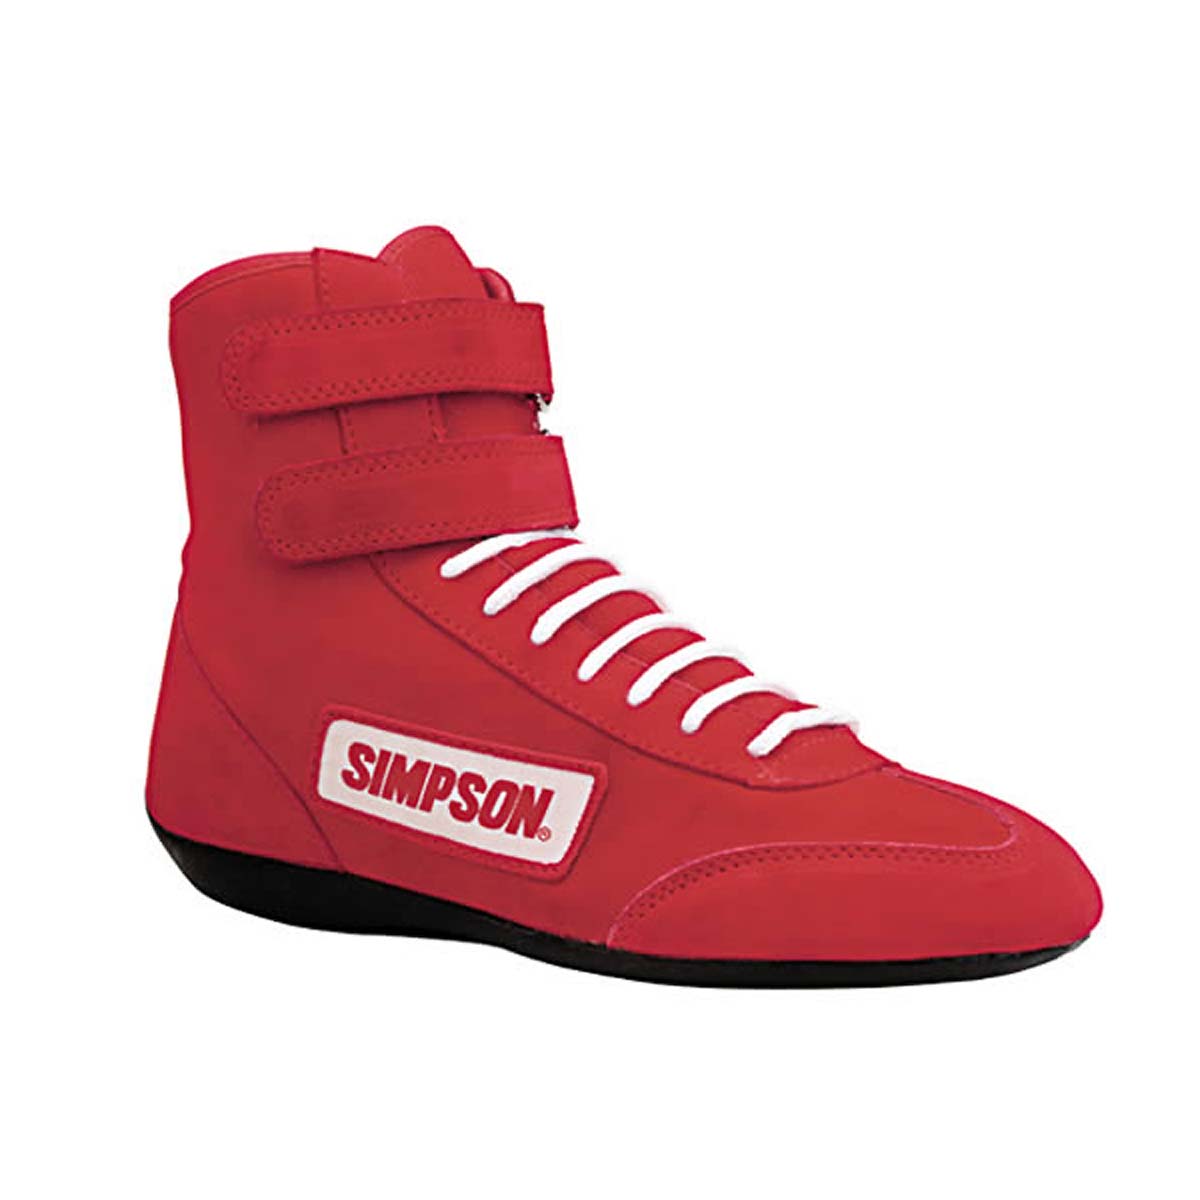 Simpson High Top Nomex Driving Shoes – OG Racing